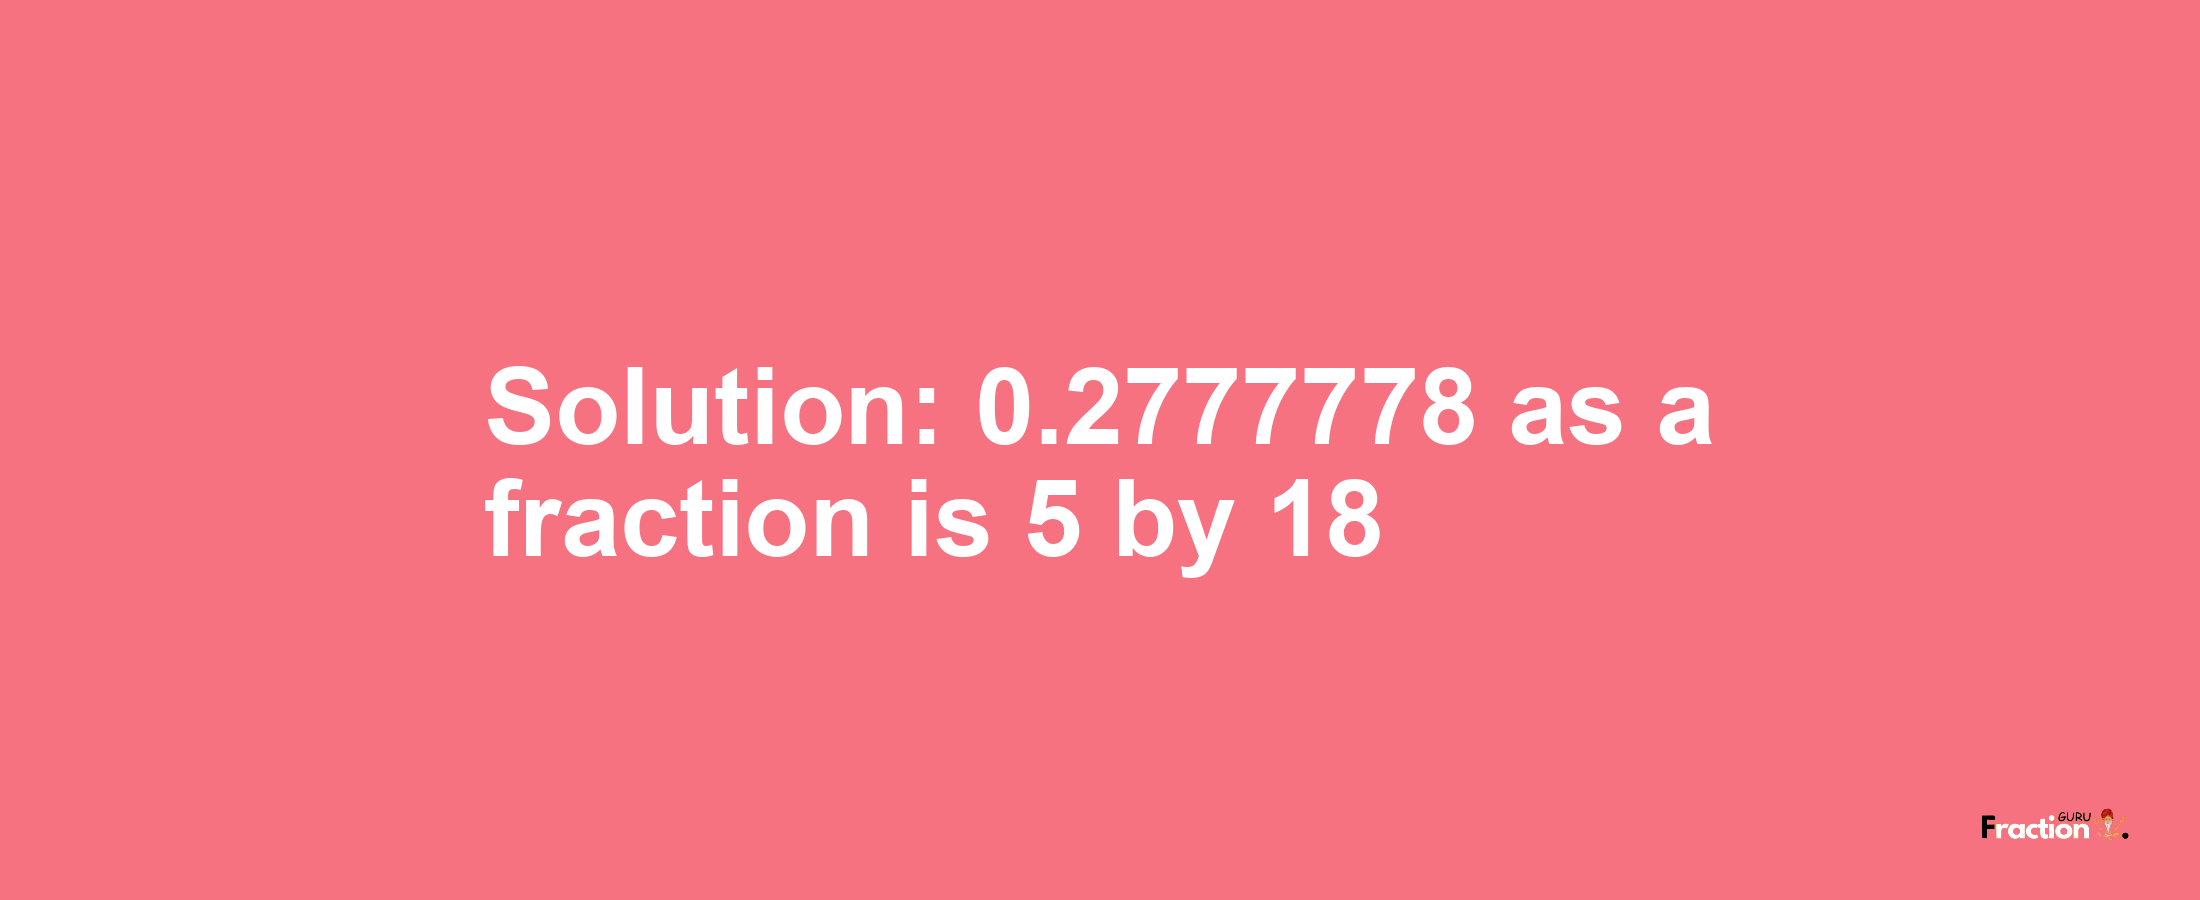 Solution:0.2777778 as a fraction is 5/18